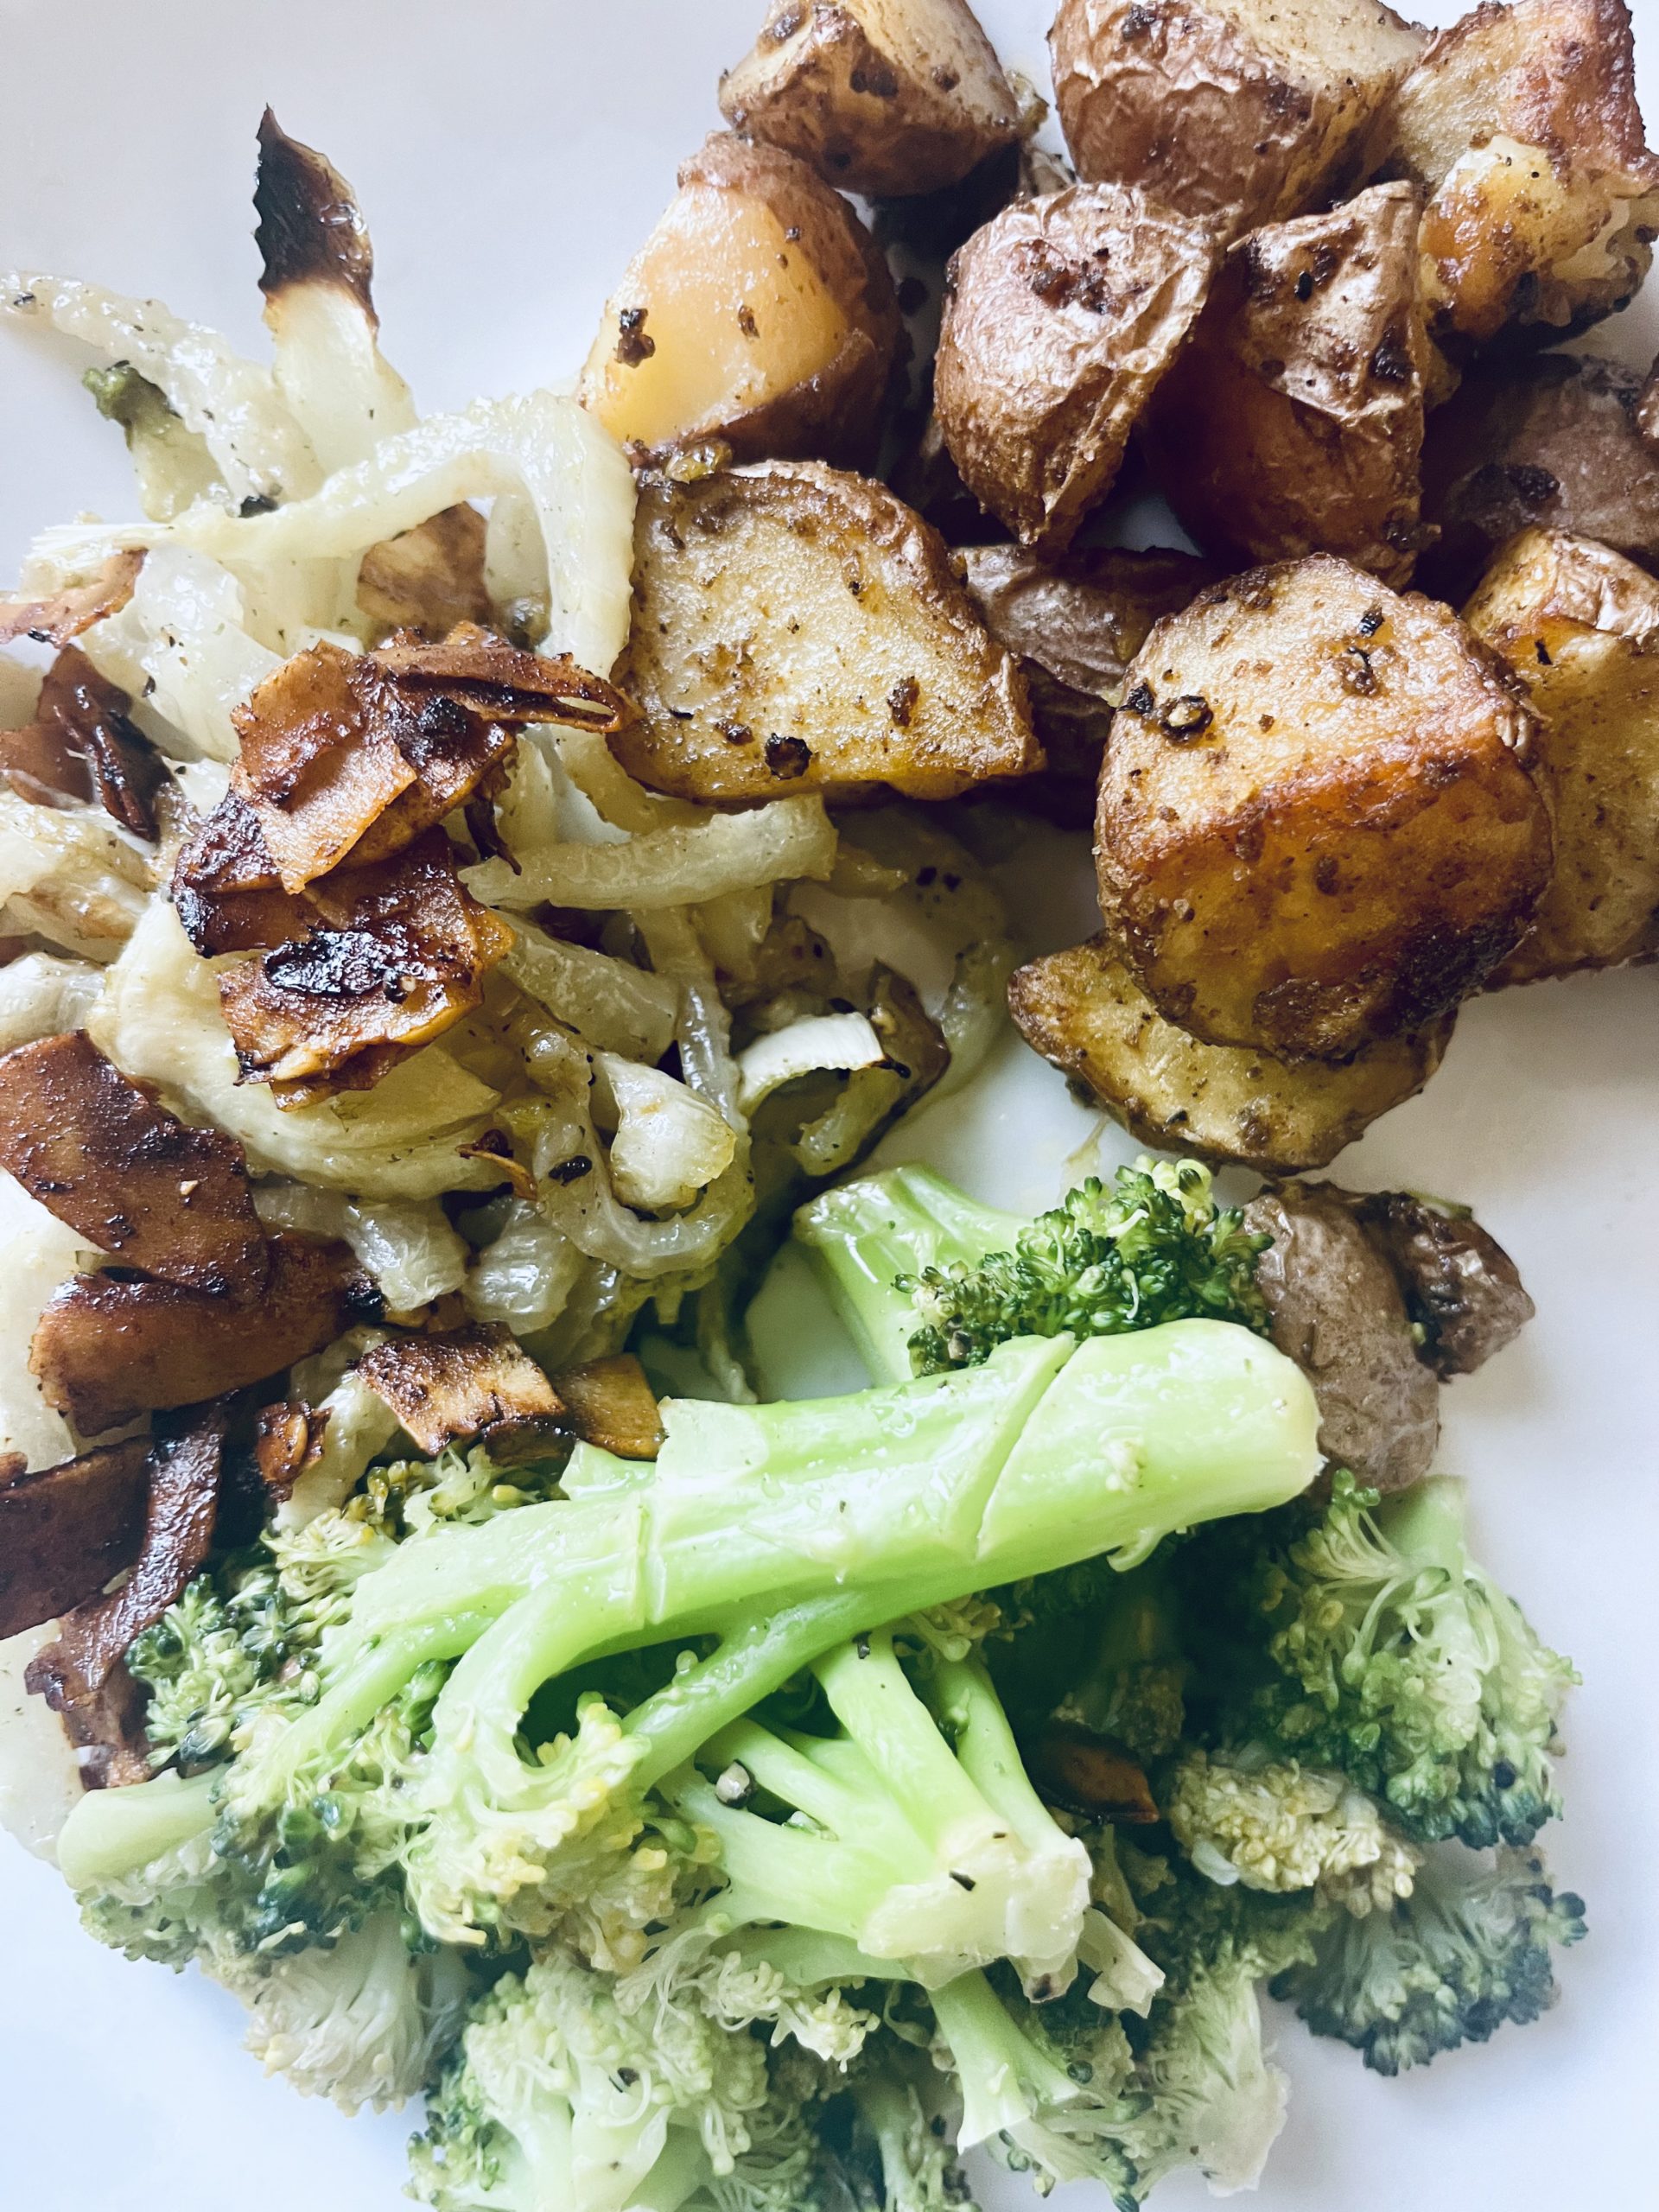 spicy-roasted-potatoes-roasted-fennel-smoked-coconut-chips-steamed-broccoli